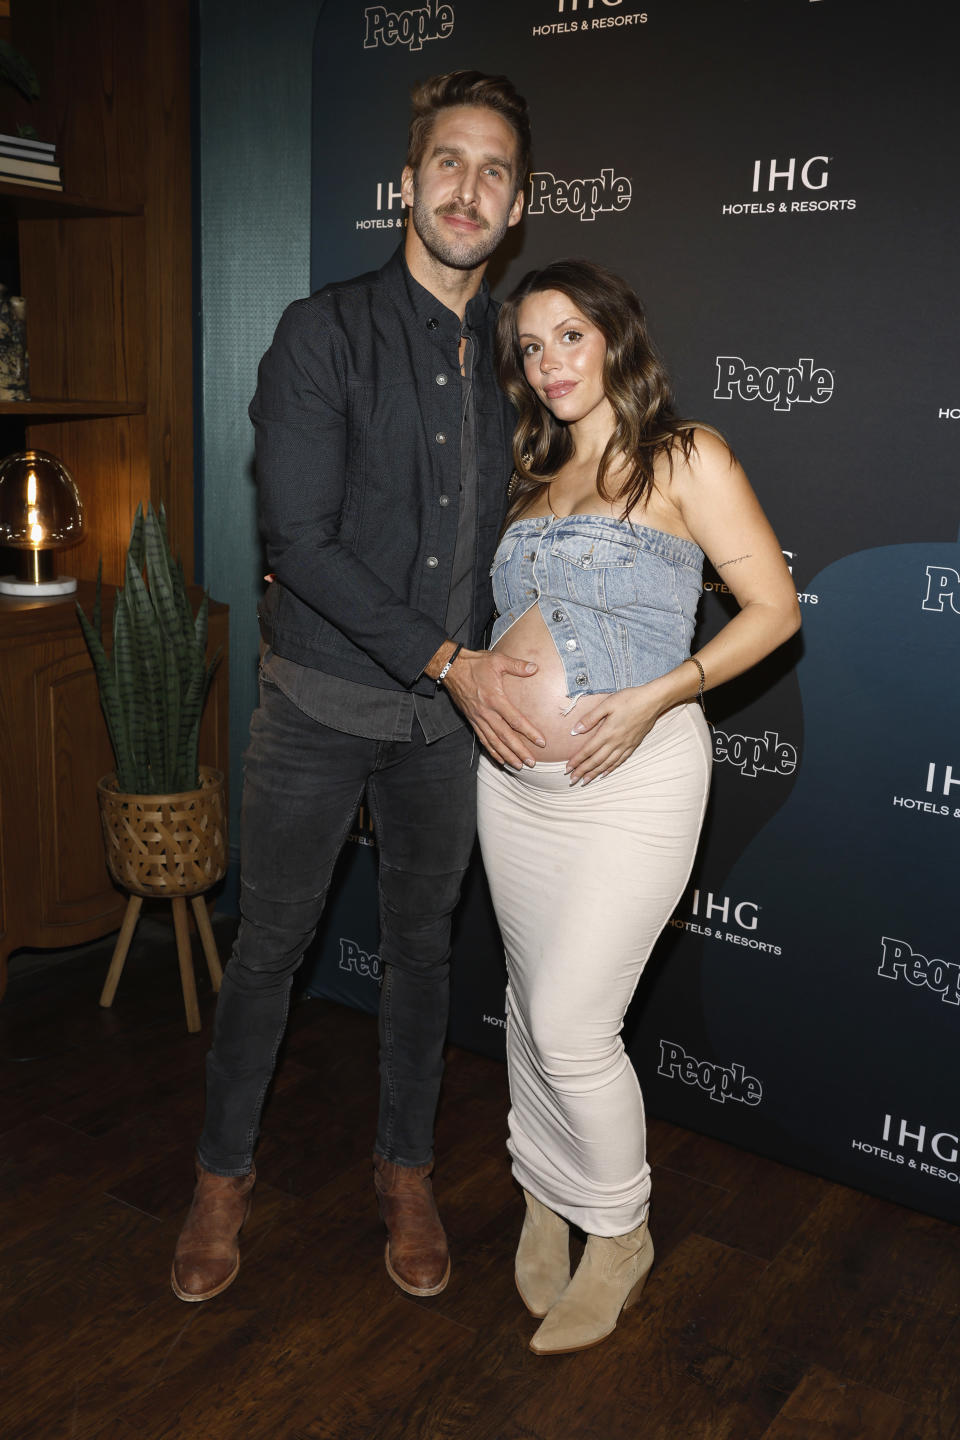 Shawn Booth and Audrey ‘Dre’ Joseph